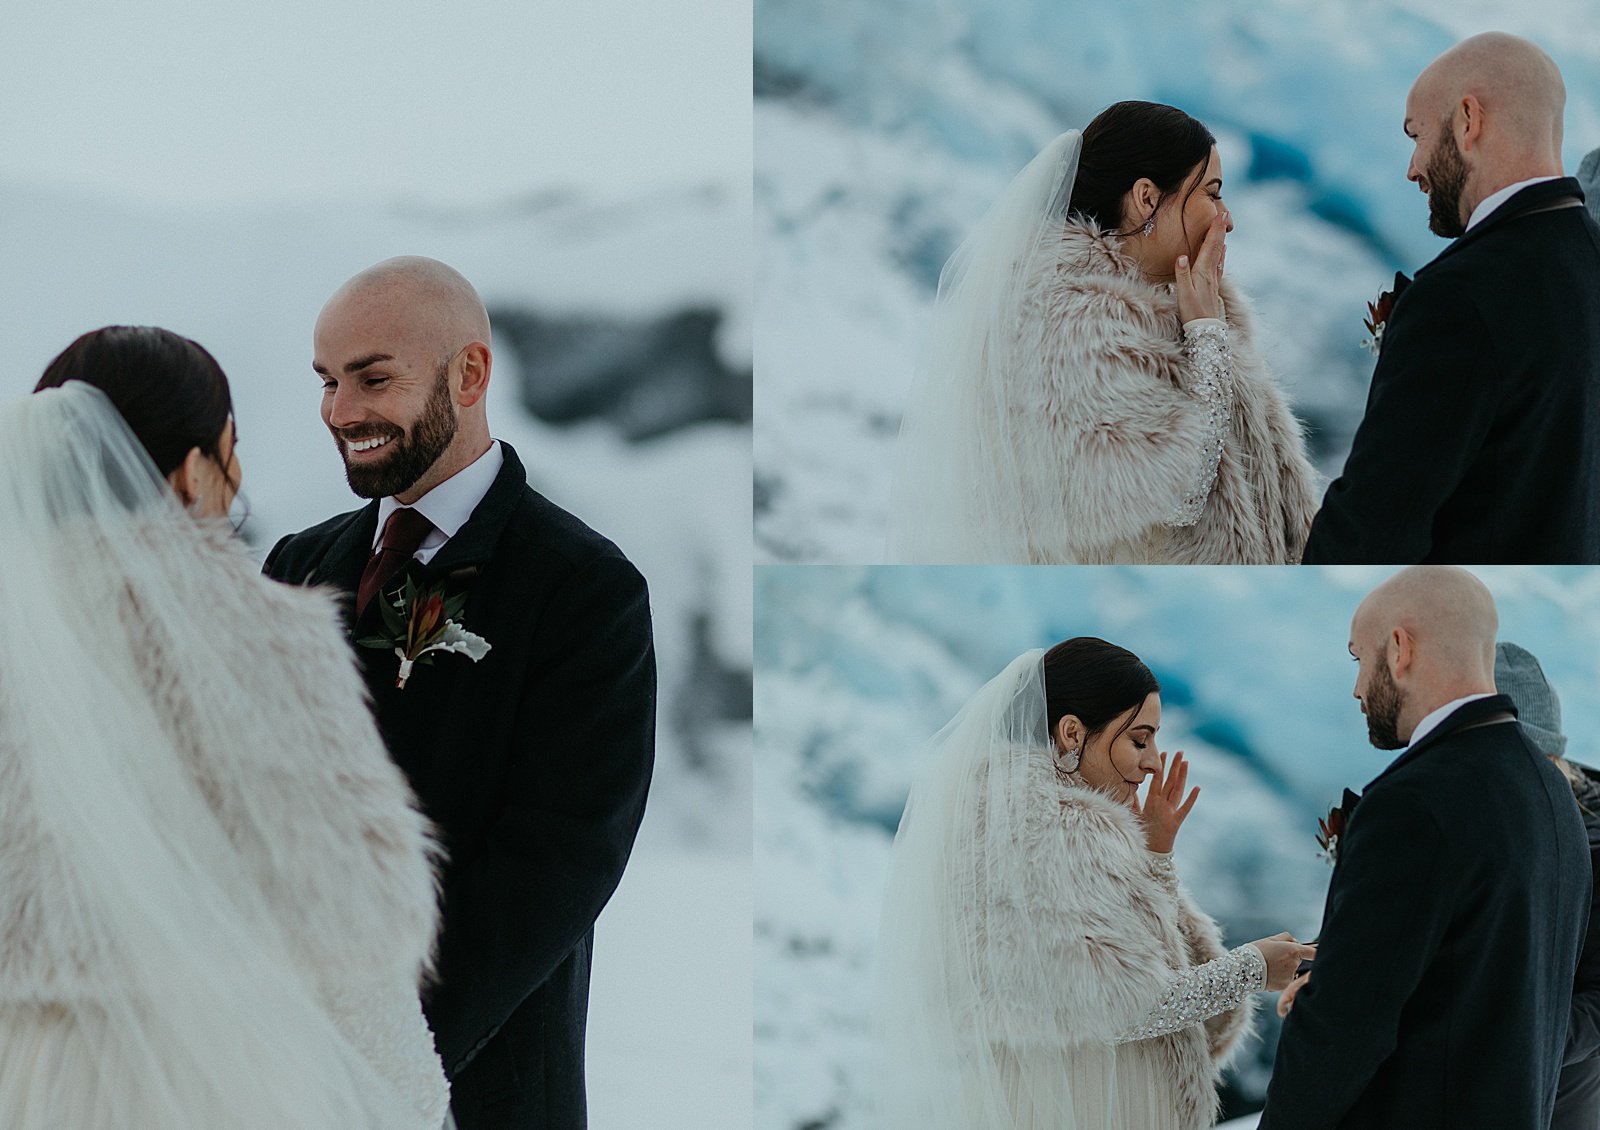  Bride and groom exchanging vows on a snowy mountain 